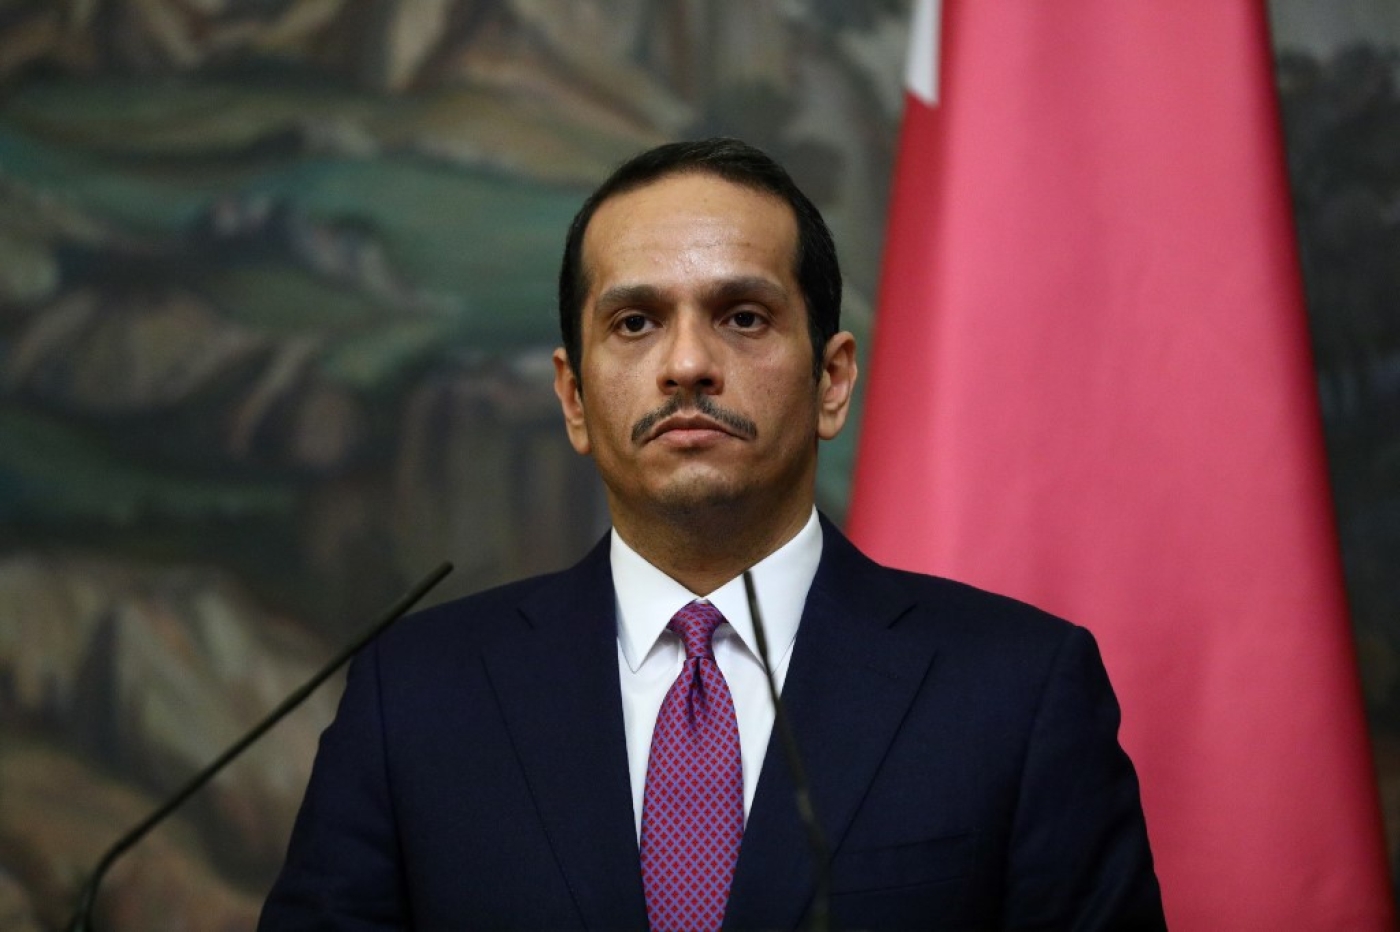 The Qatari foreign minister said residents in the six-member GCC were among the biggest losers in the crisis.